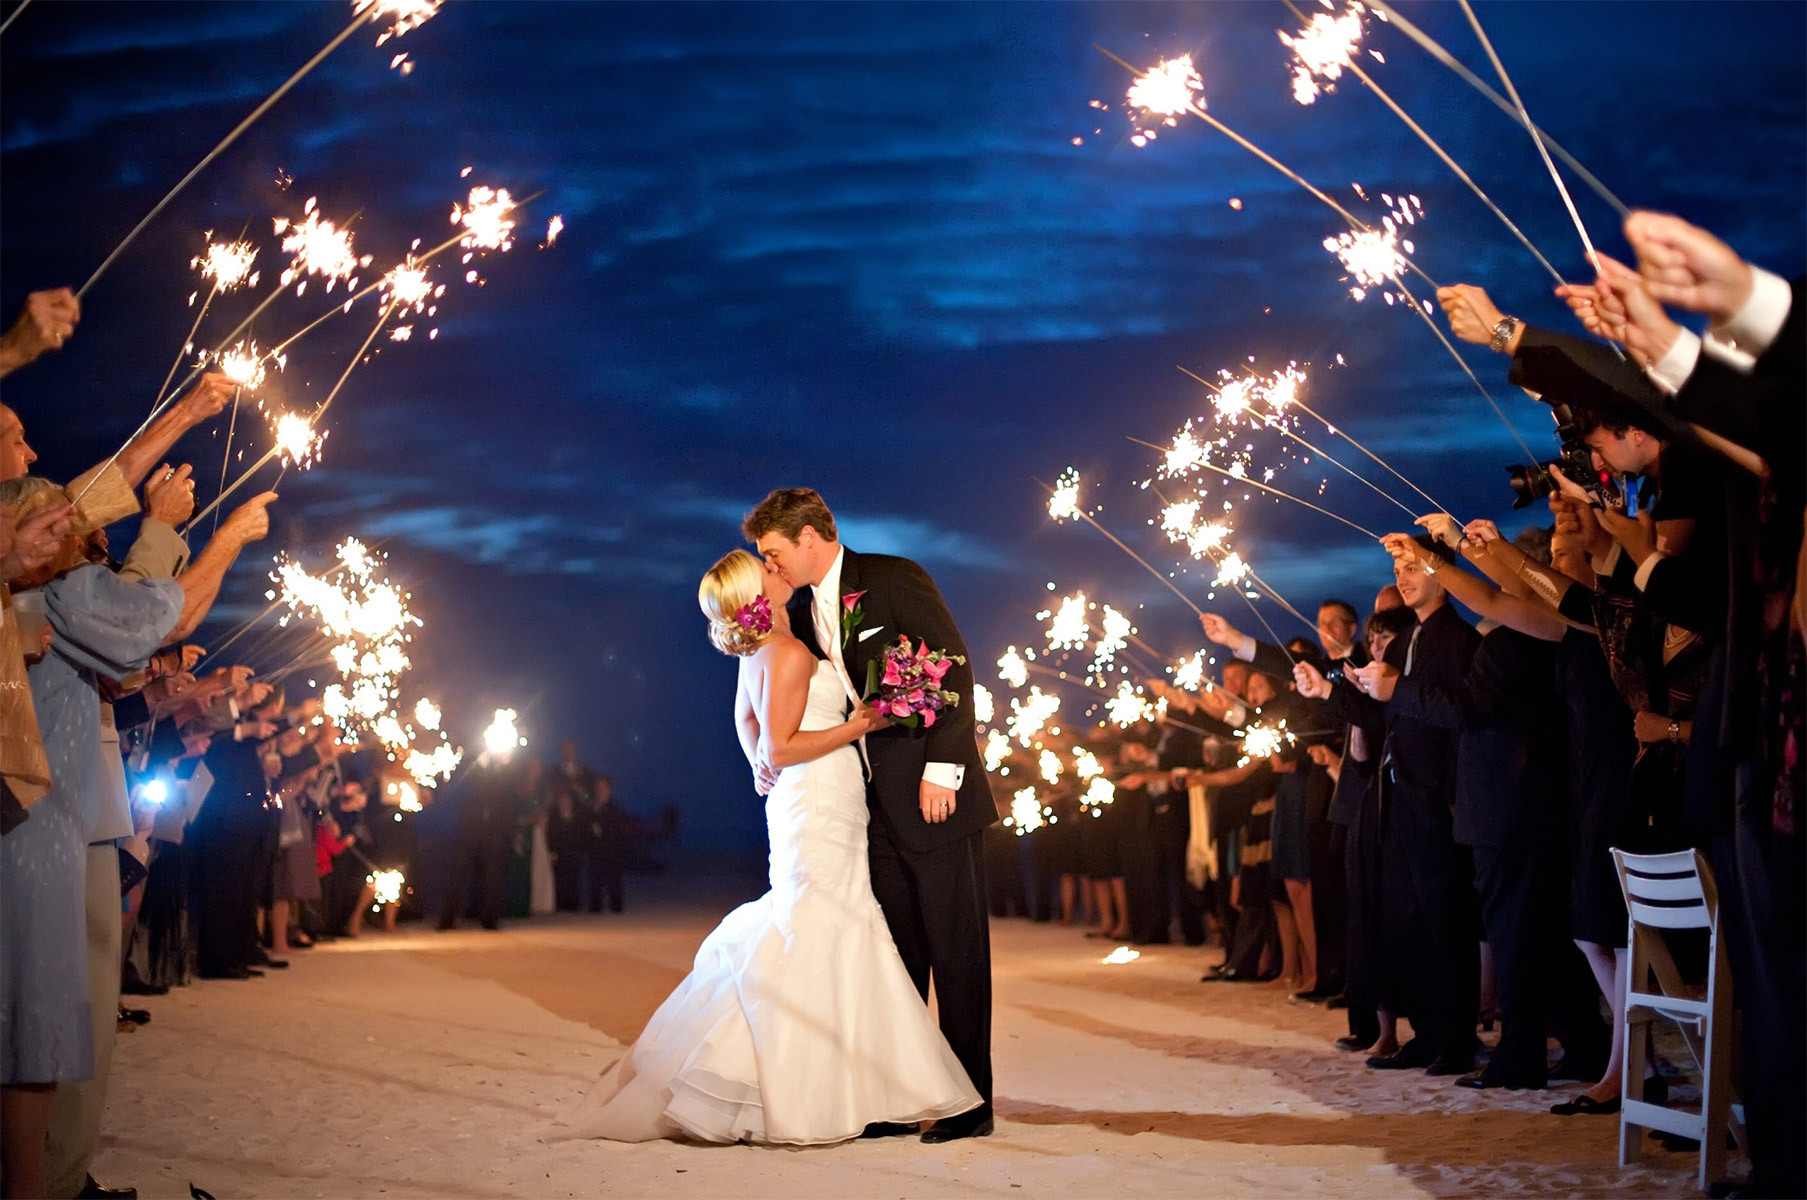 Wedding Sparkler Pictures
 Using Sparklers for Your Wedding Exit Send f A